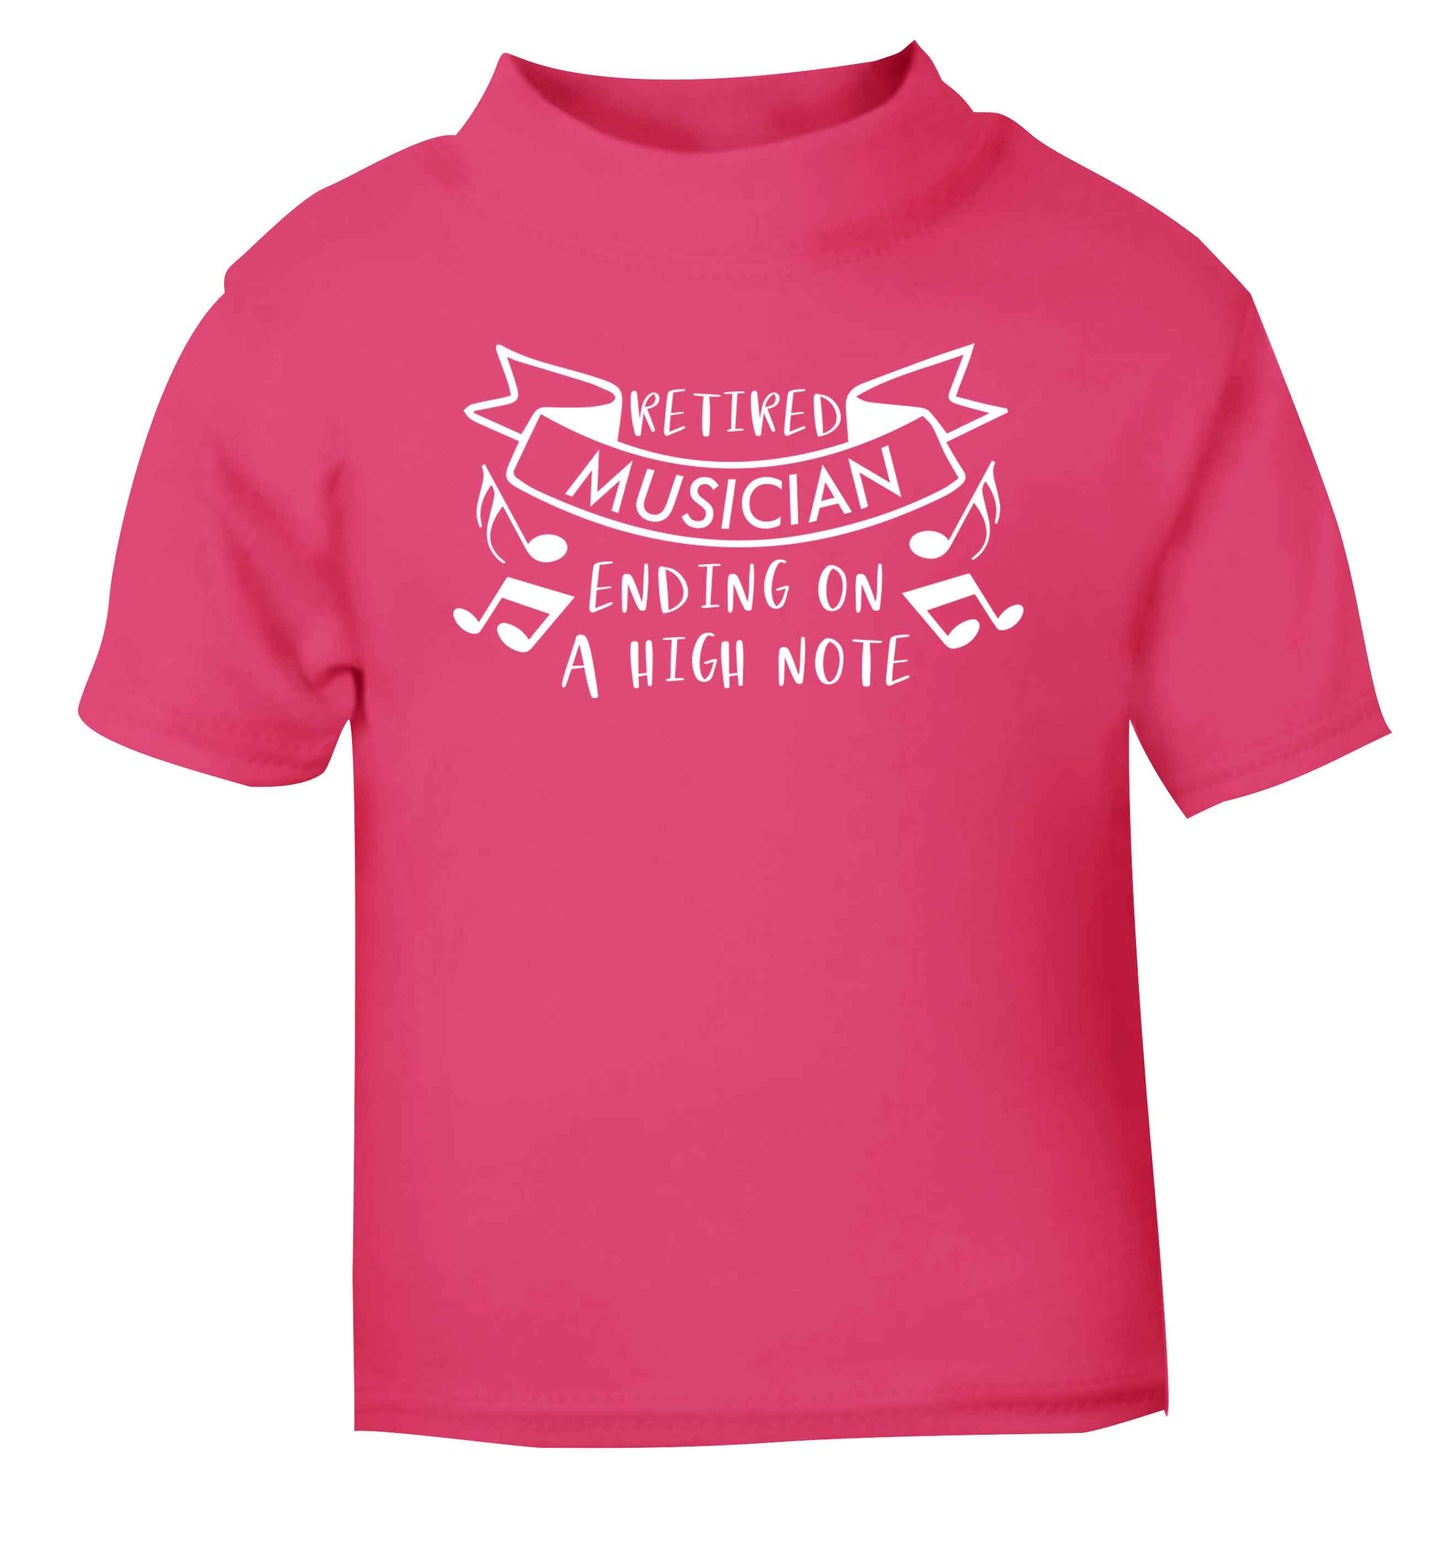 Retired musician ending on a high note pink Baby Toddler Tshirt 2 Years